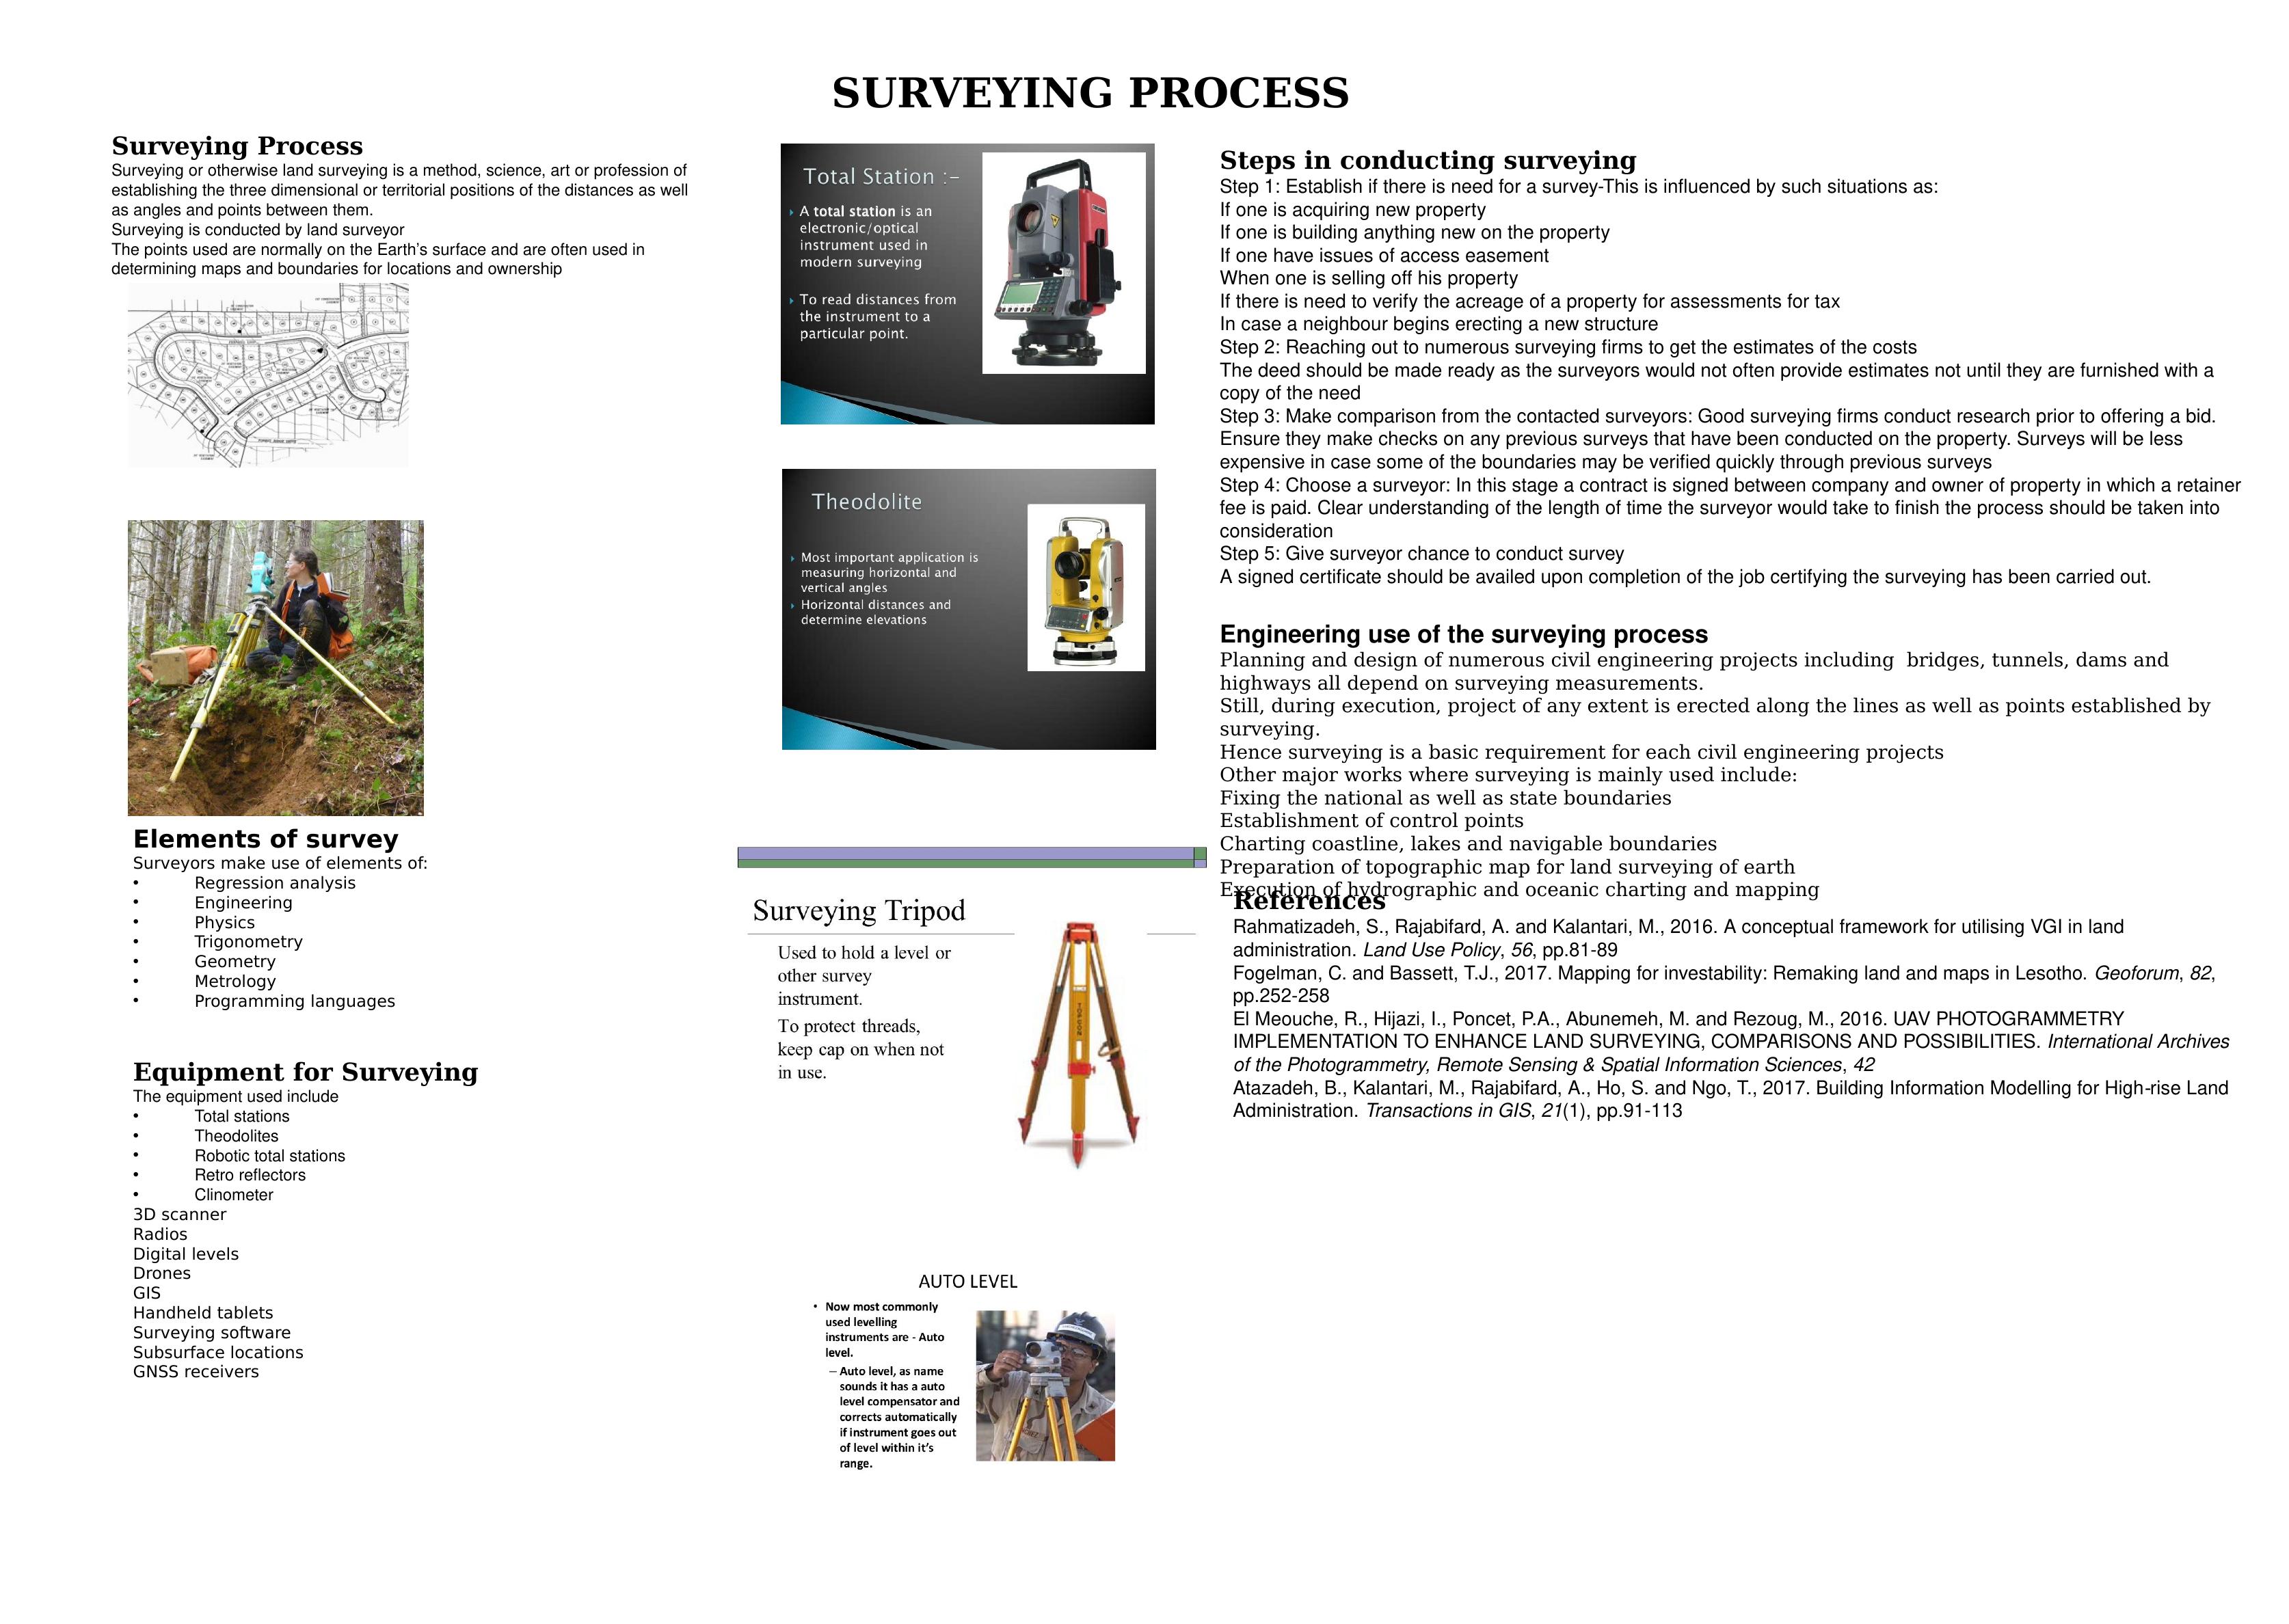 Surveying Process - Elements, Equipment, Steps and Engineering Use_1